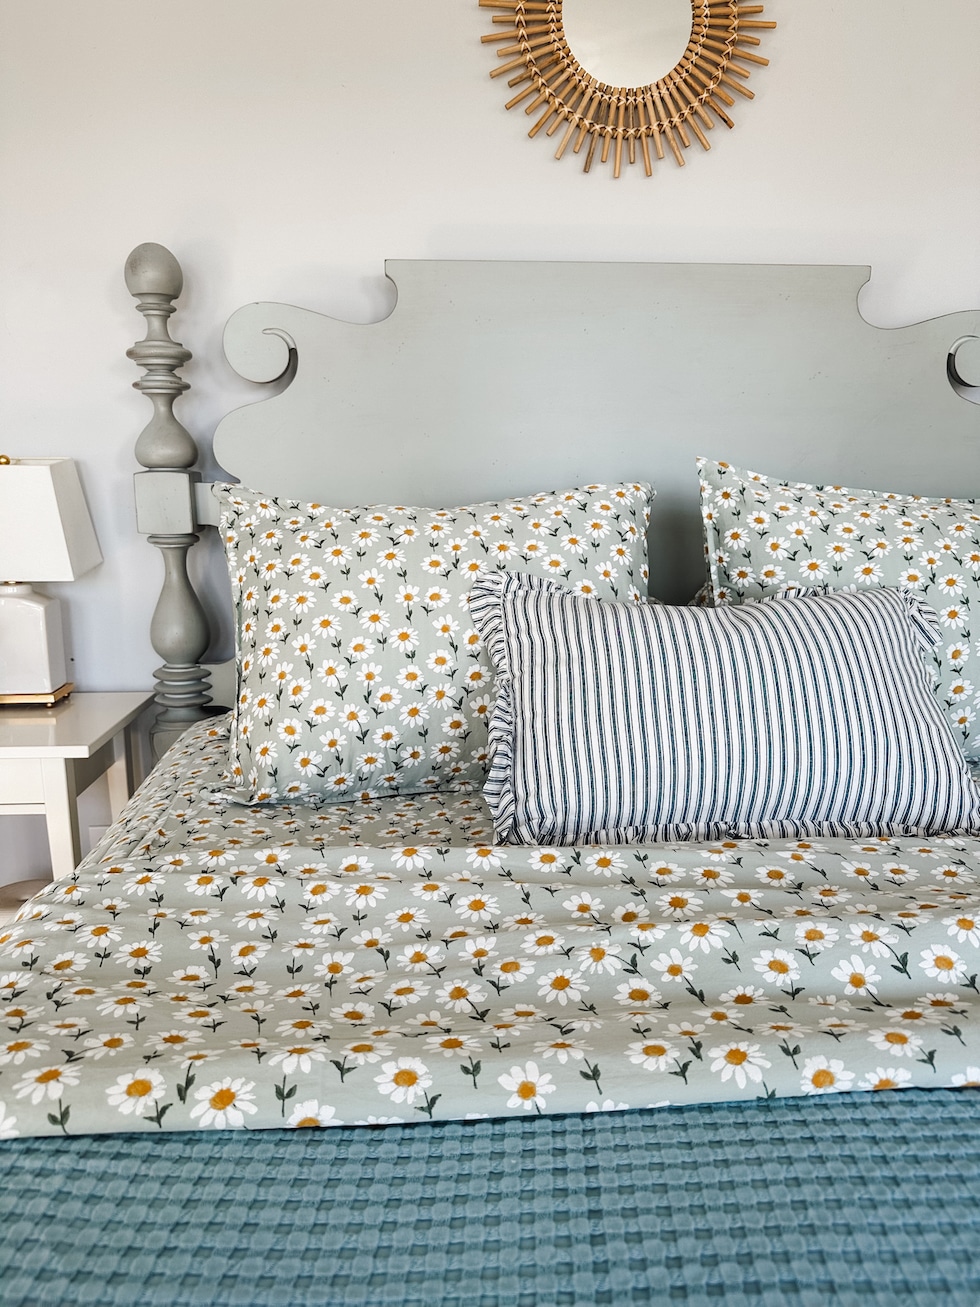 Fresh as a Daisy: Adorable Spring Sheets & Facebook Marketplace Quincy Bed is finally in our room!